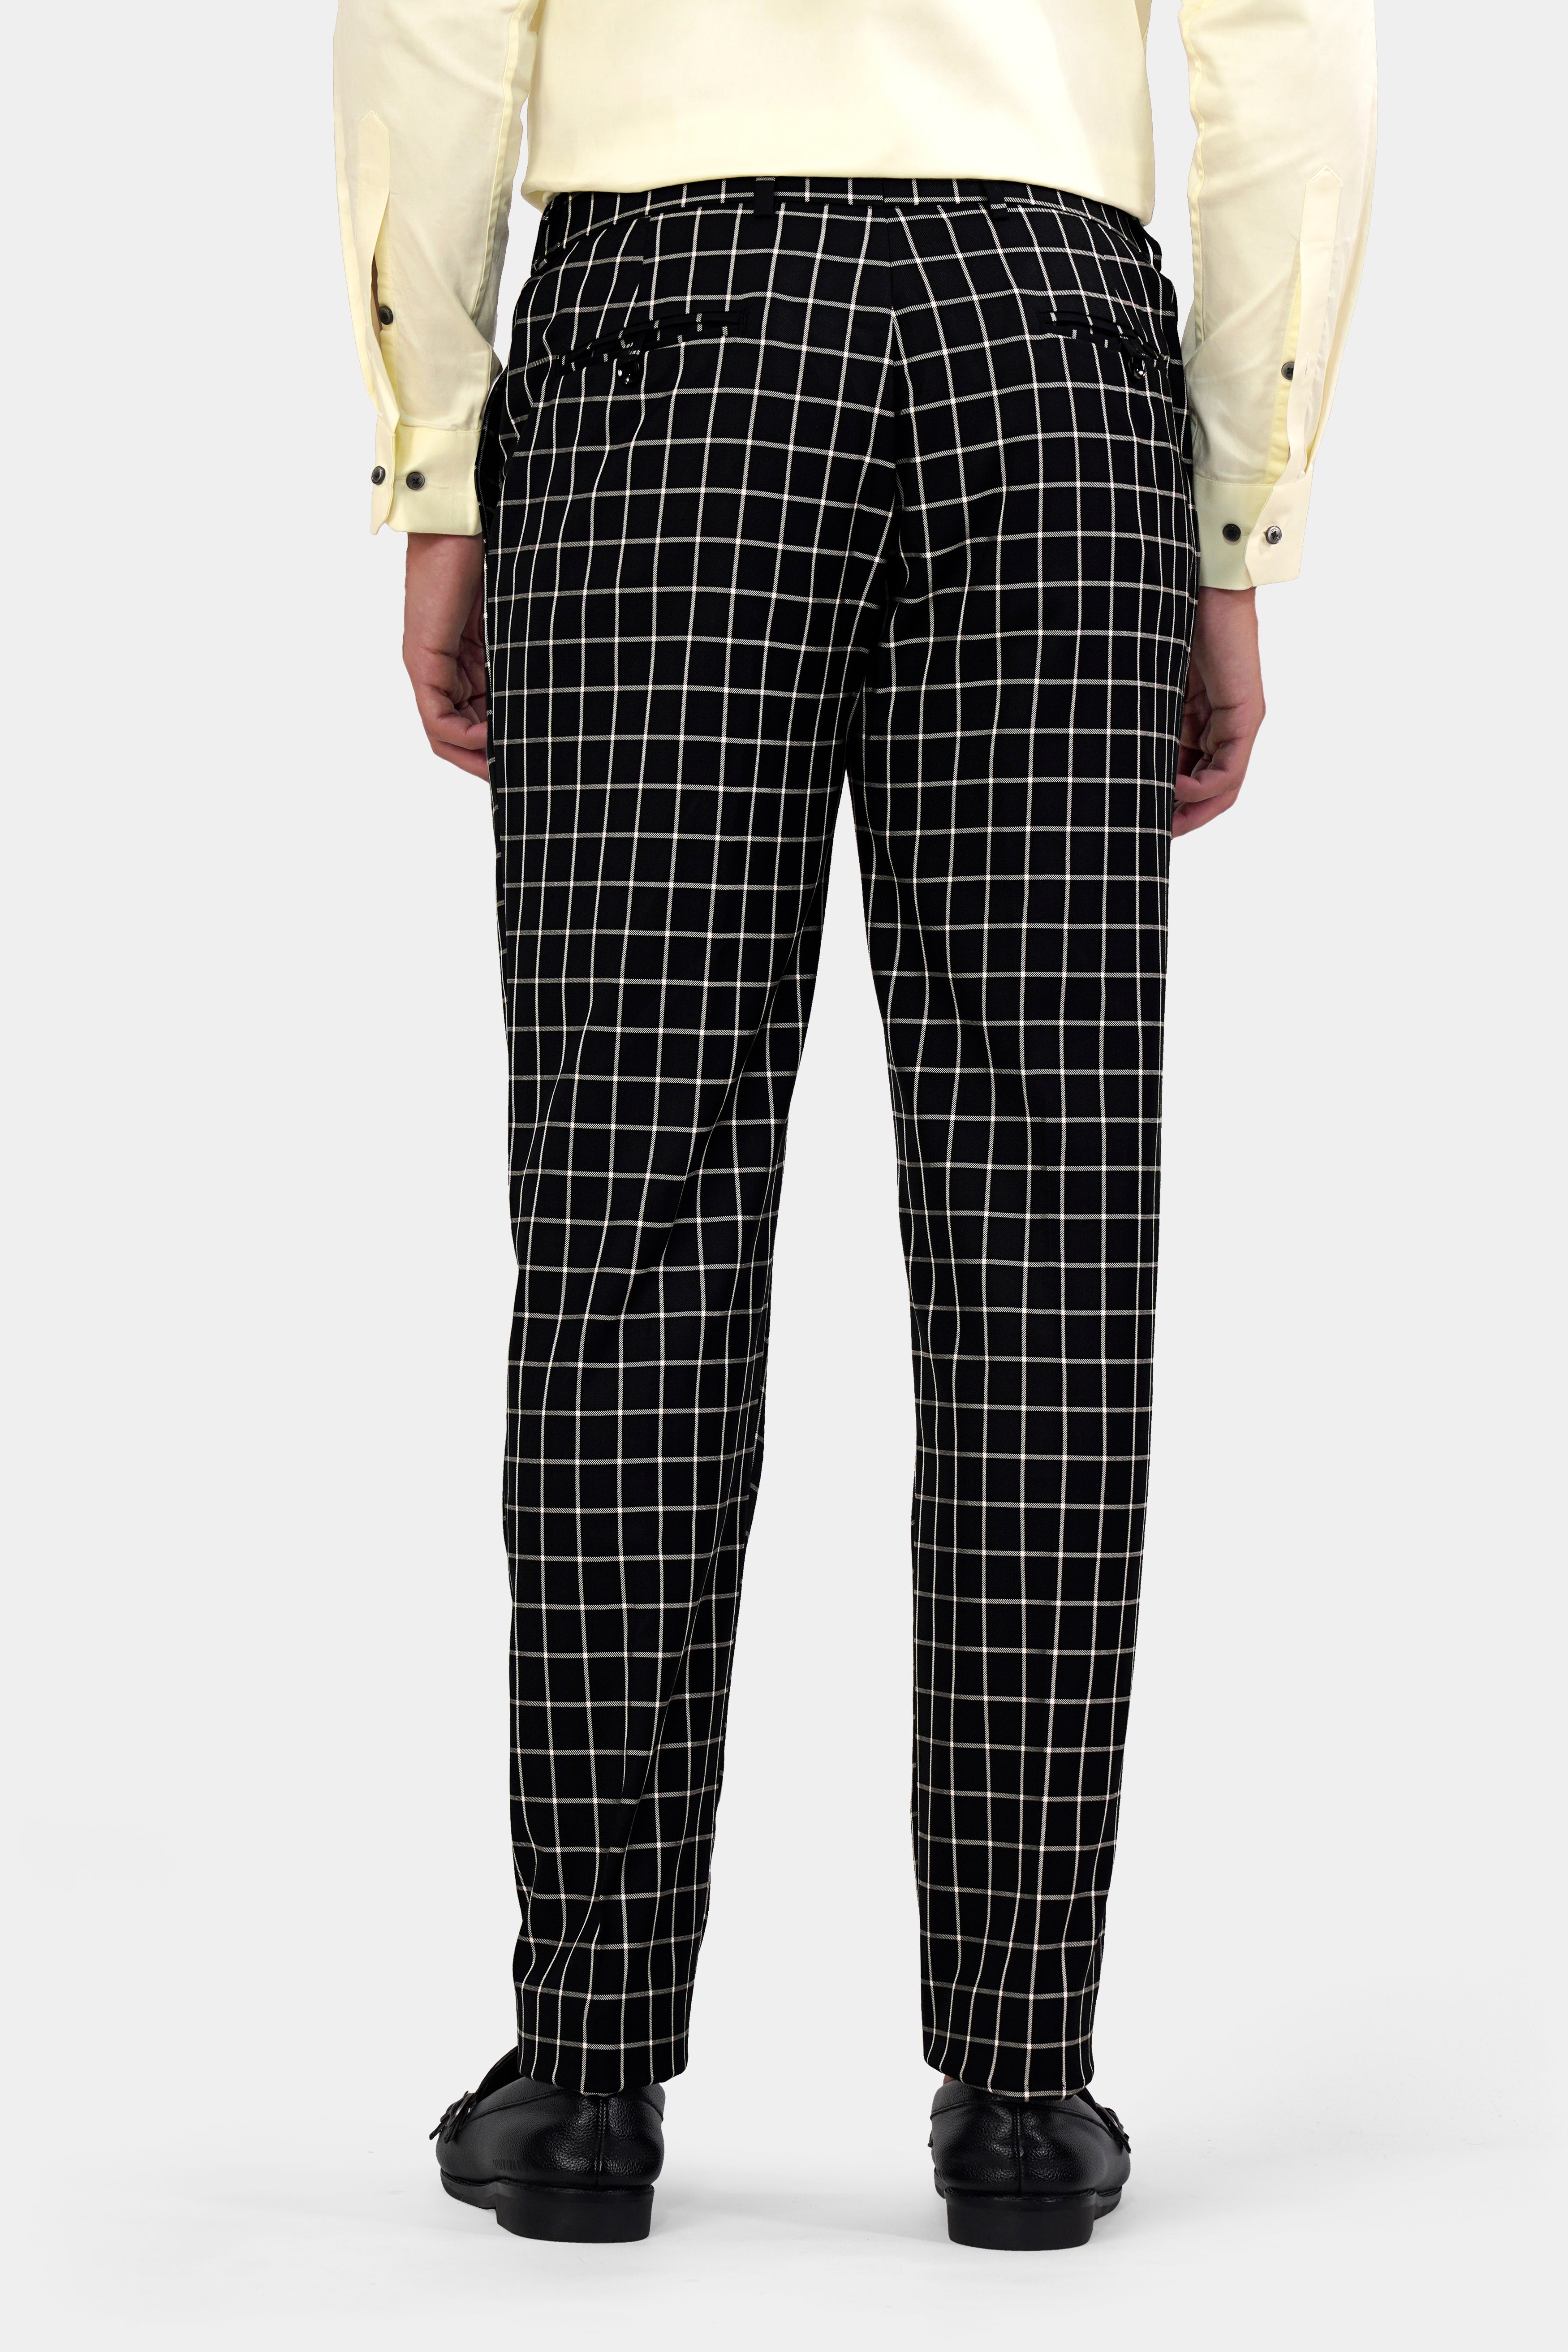 Jade Black and White Checkered Wool Rich Stretchable Pant T2932-SW-28, T2932-SW-30, T2932-SW-32, T2932-SW-34, T2932-SW-36, T2932-SW-38, T2932-SW-40, T2932-SW-42, T2932-SW-44